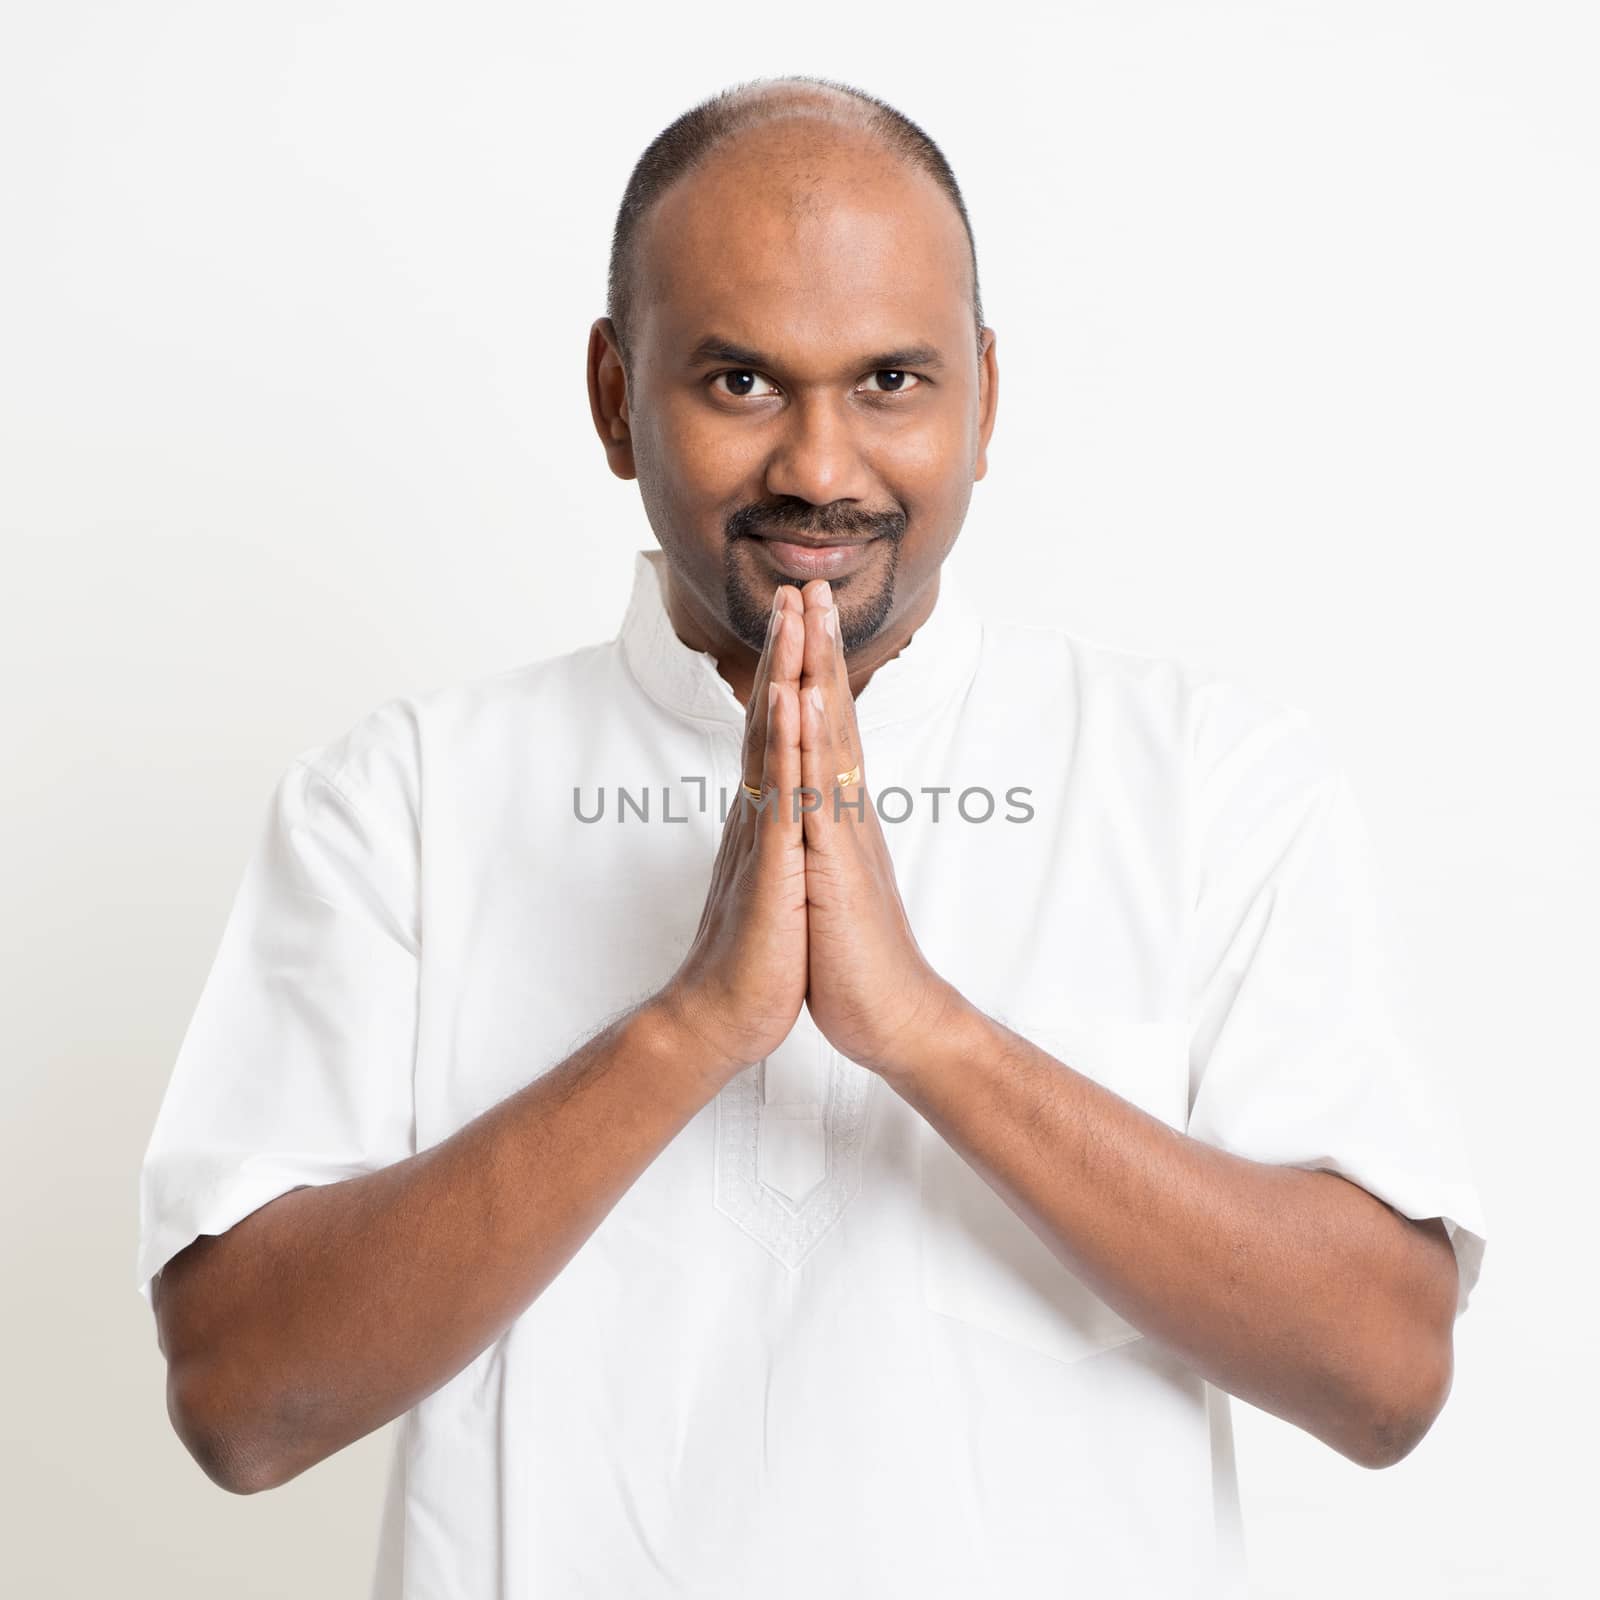 Portrait of mature casual business Indian man praying, standing on plain background with shadow.